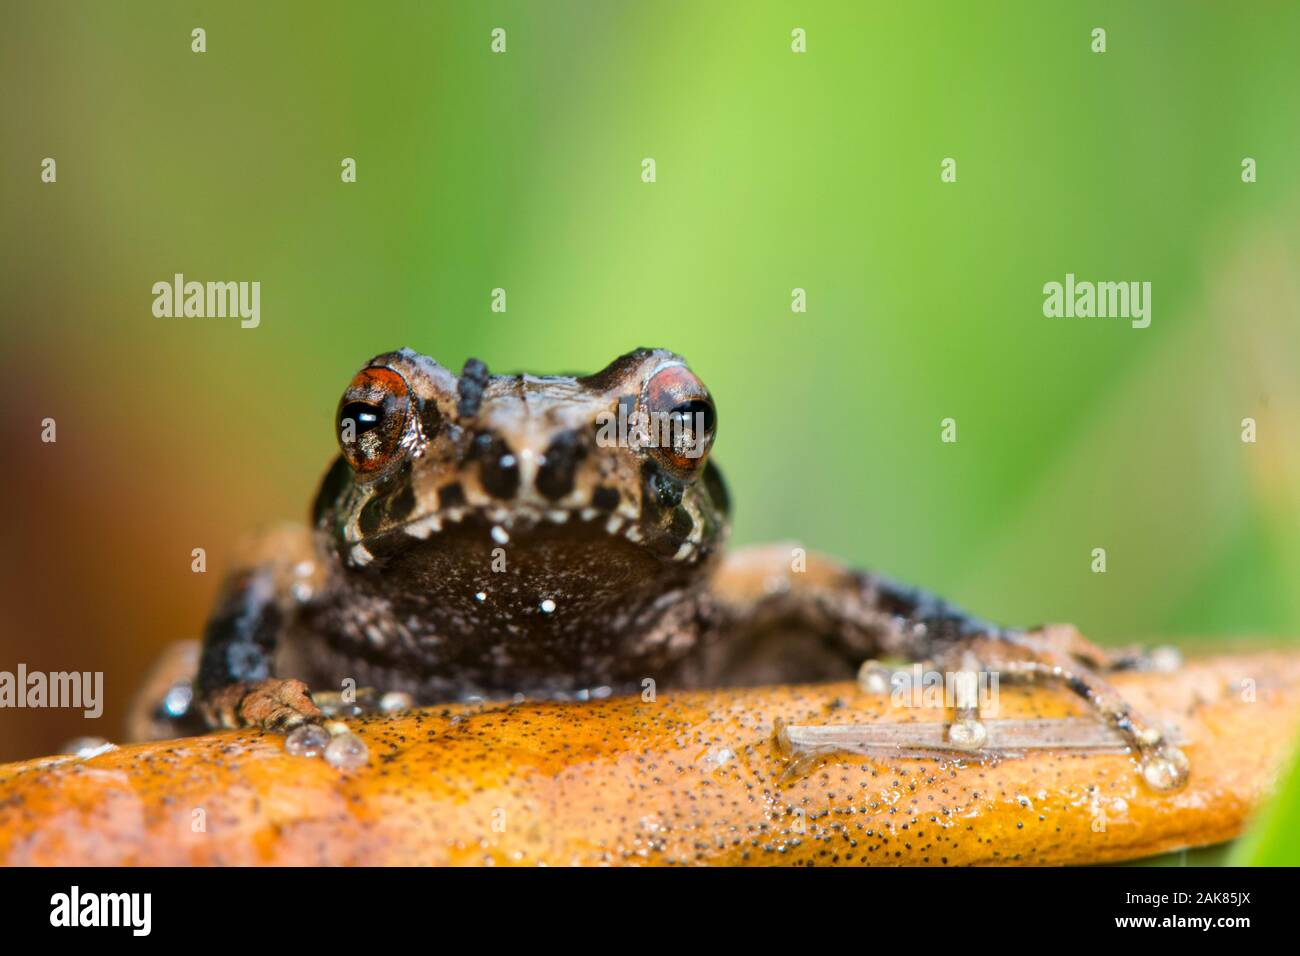 Pseudophilautus alto, an endemic species of frog in the Rhacophoridae family with a very restricted distribution range from the cloud forest of Horton Stock Photo